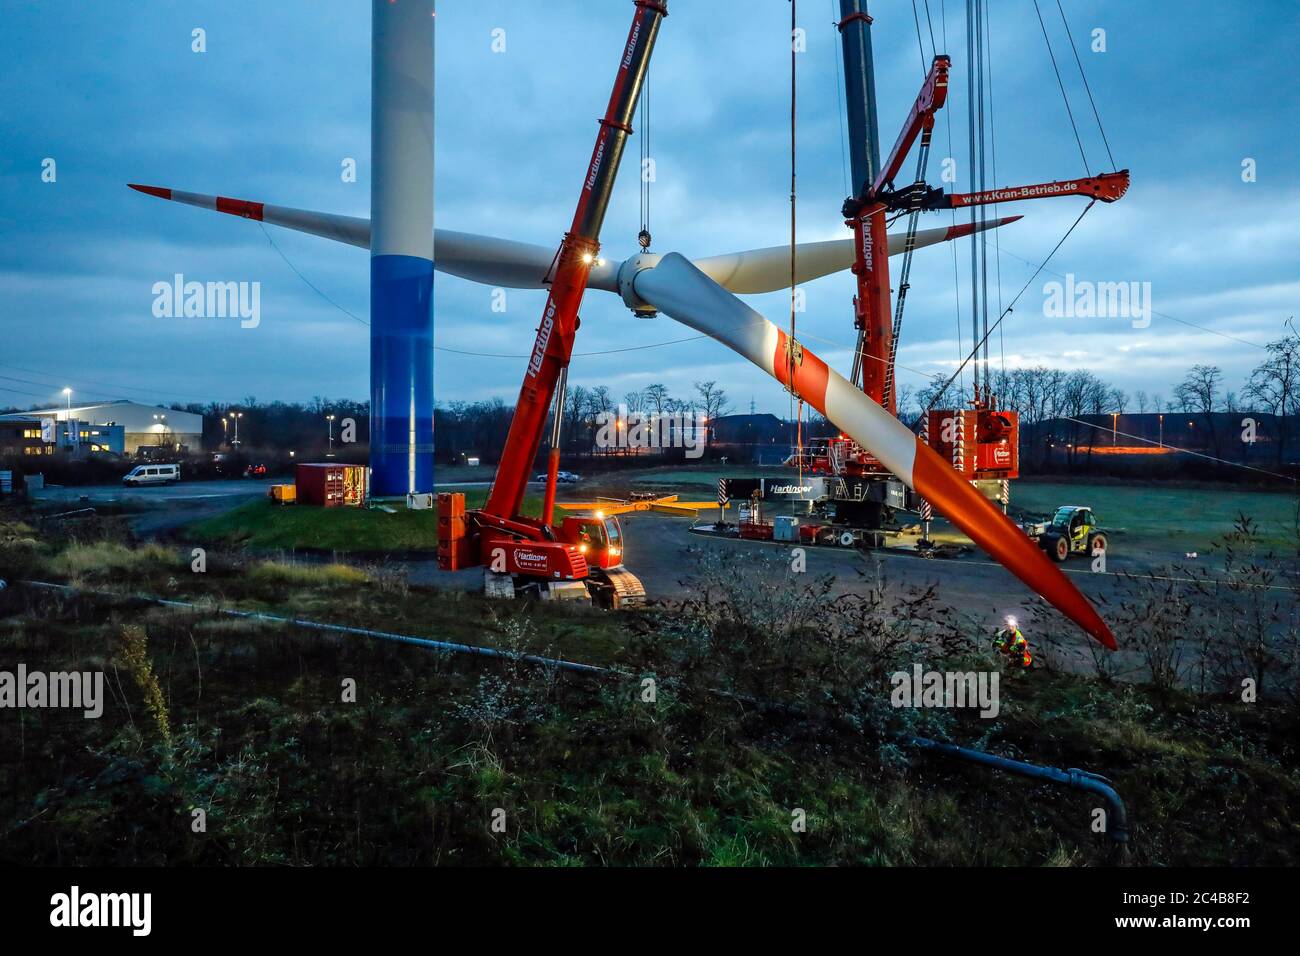 Assembly a wind power plant, lift rotor with rotor blades at dusk, Bottrop, Ruhr area, North Rhine-Westphalia, Germany Photo - Alamy